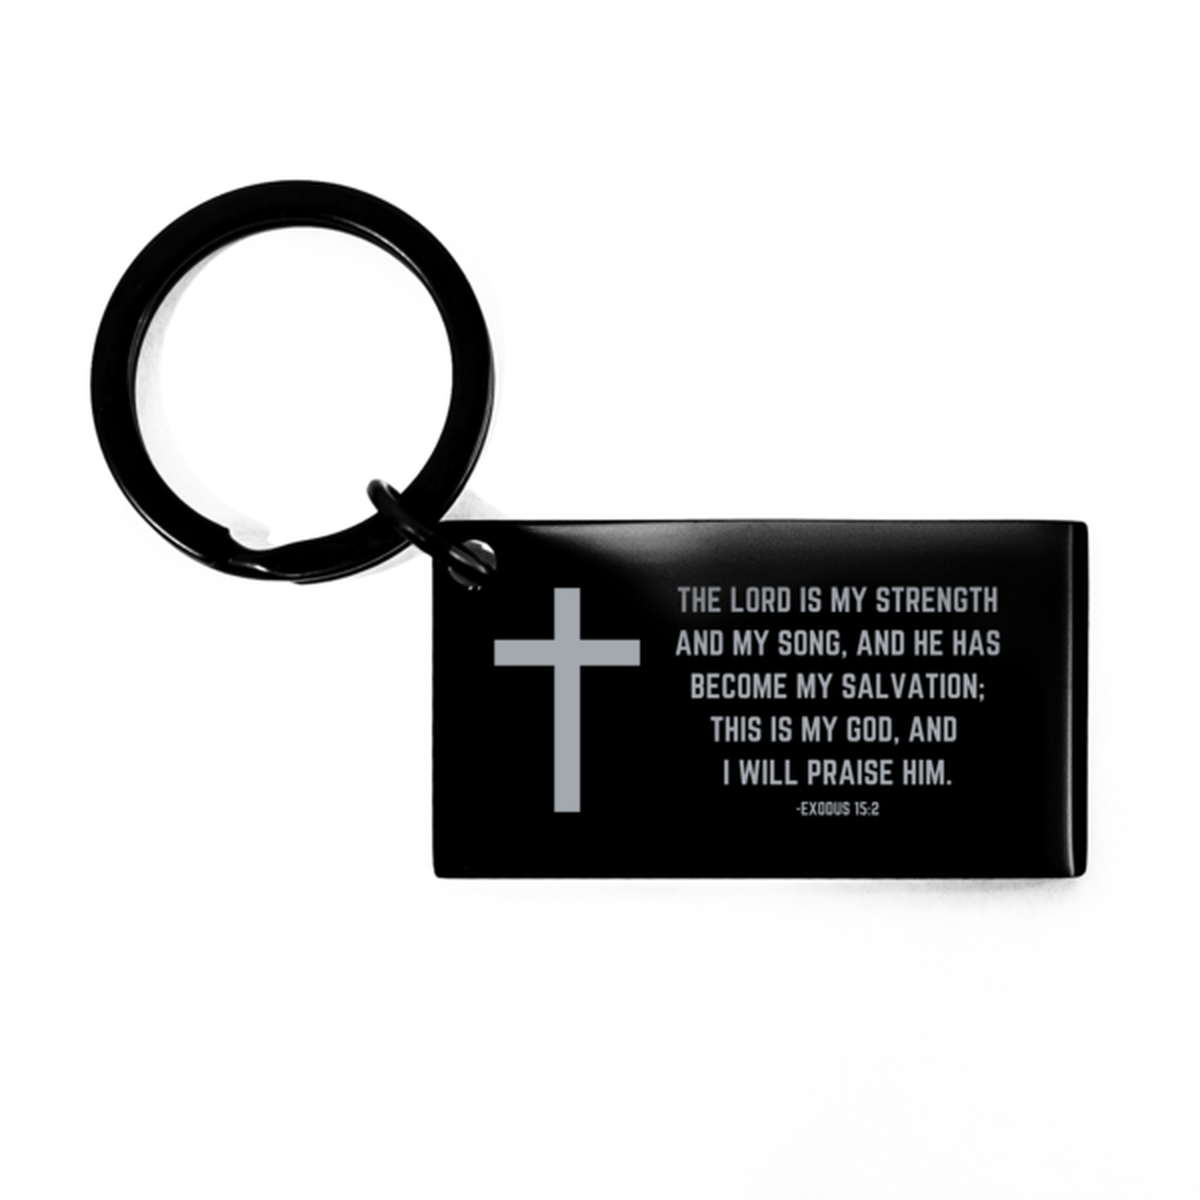 Baptism Gifts For Teenage Boys Girls, Christian Bible Verse Black Keychain, The Lord is my strength, Confirmation Gifts, Bible Verse Keyring for Son, Godson, Grandson, Nephew